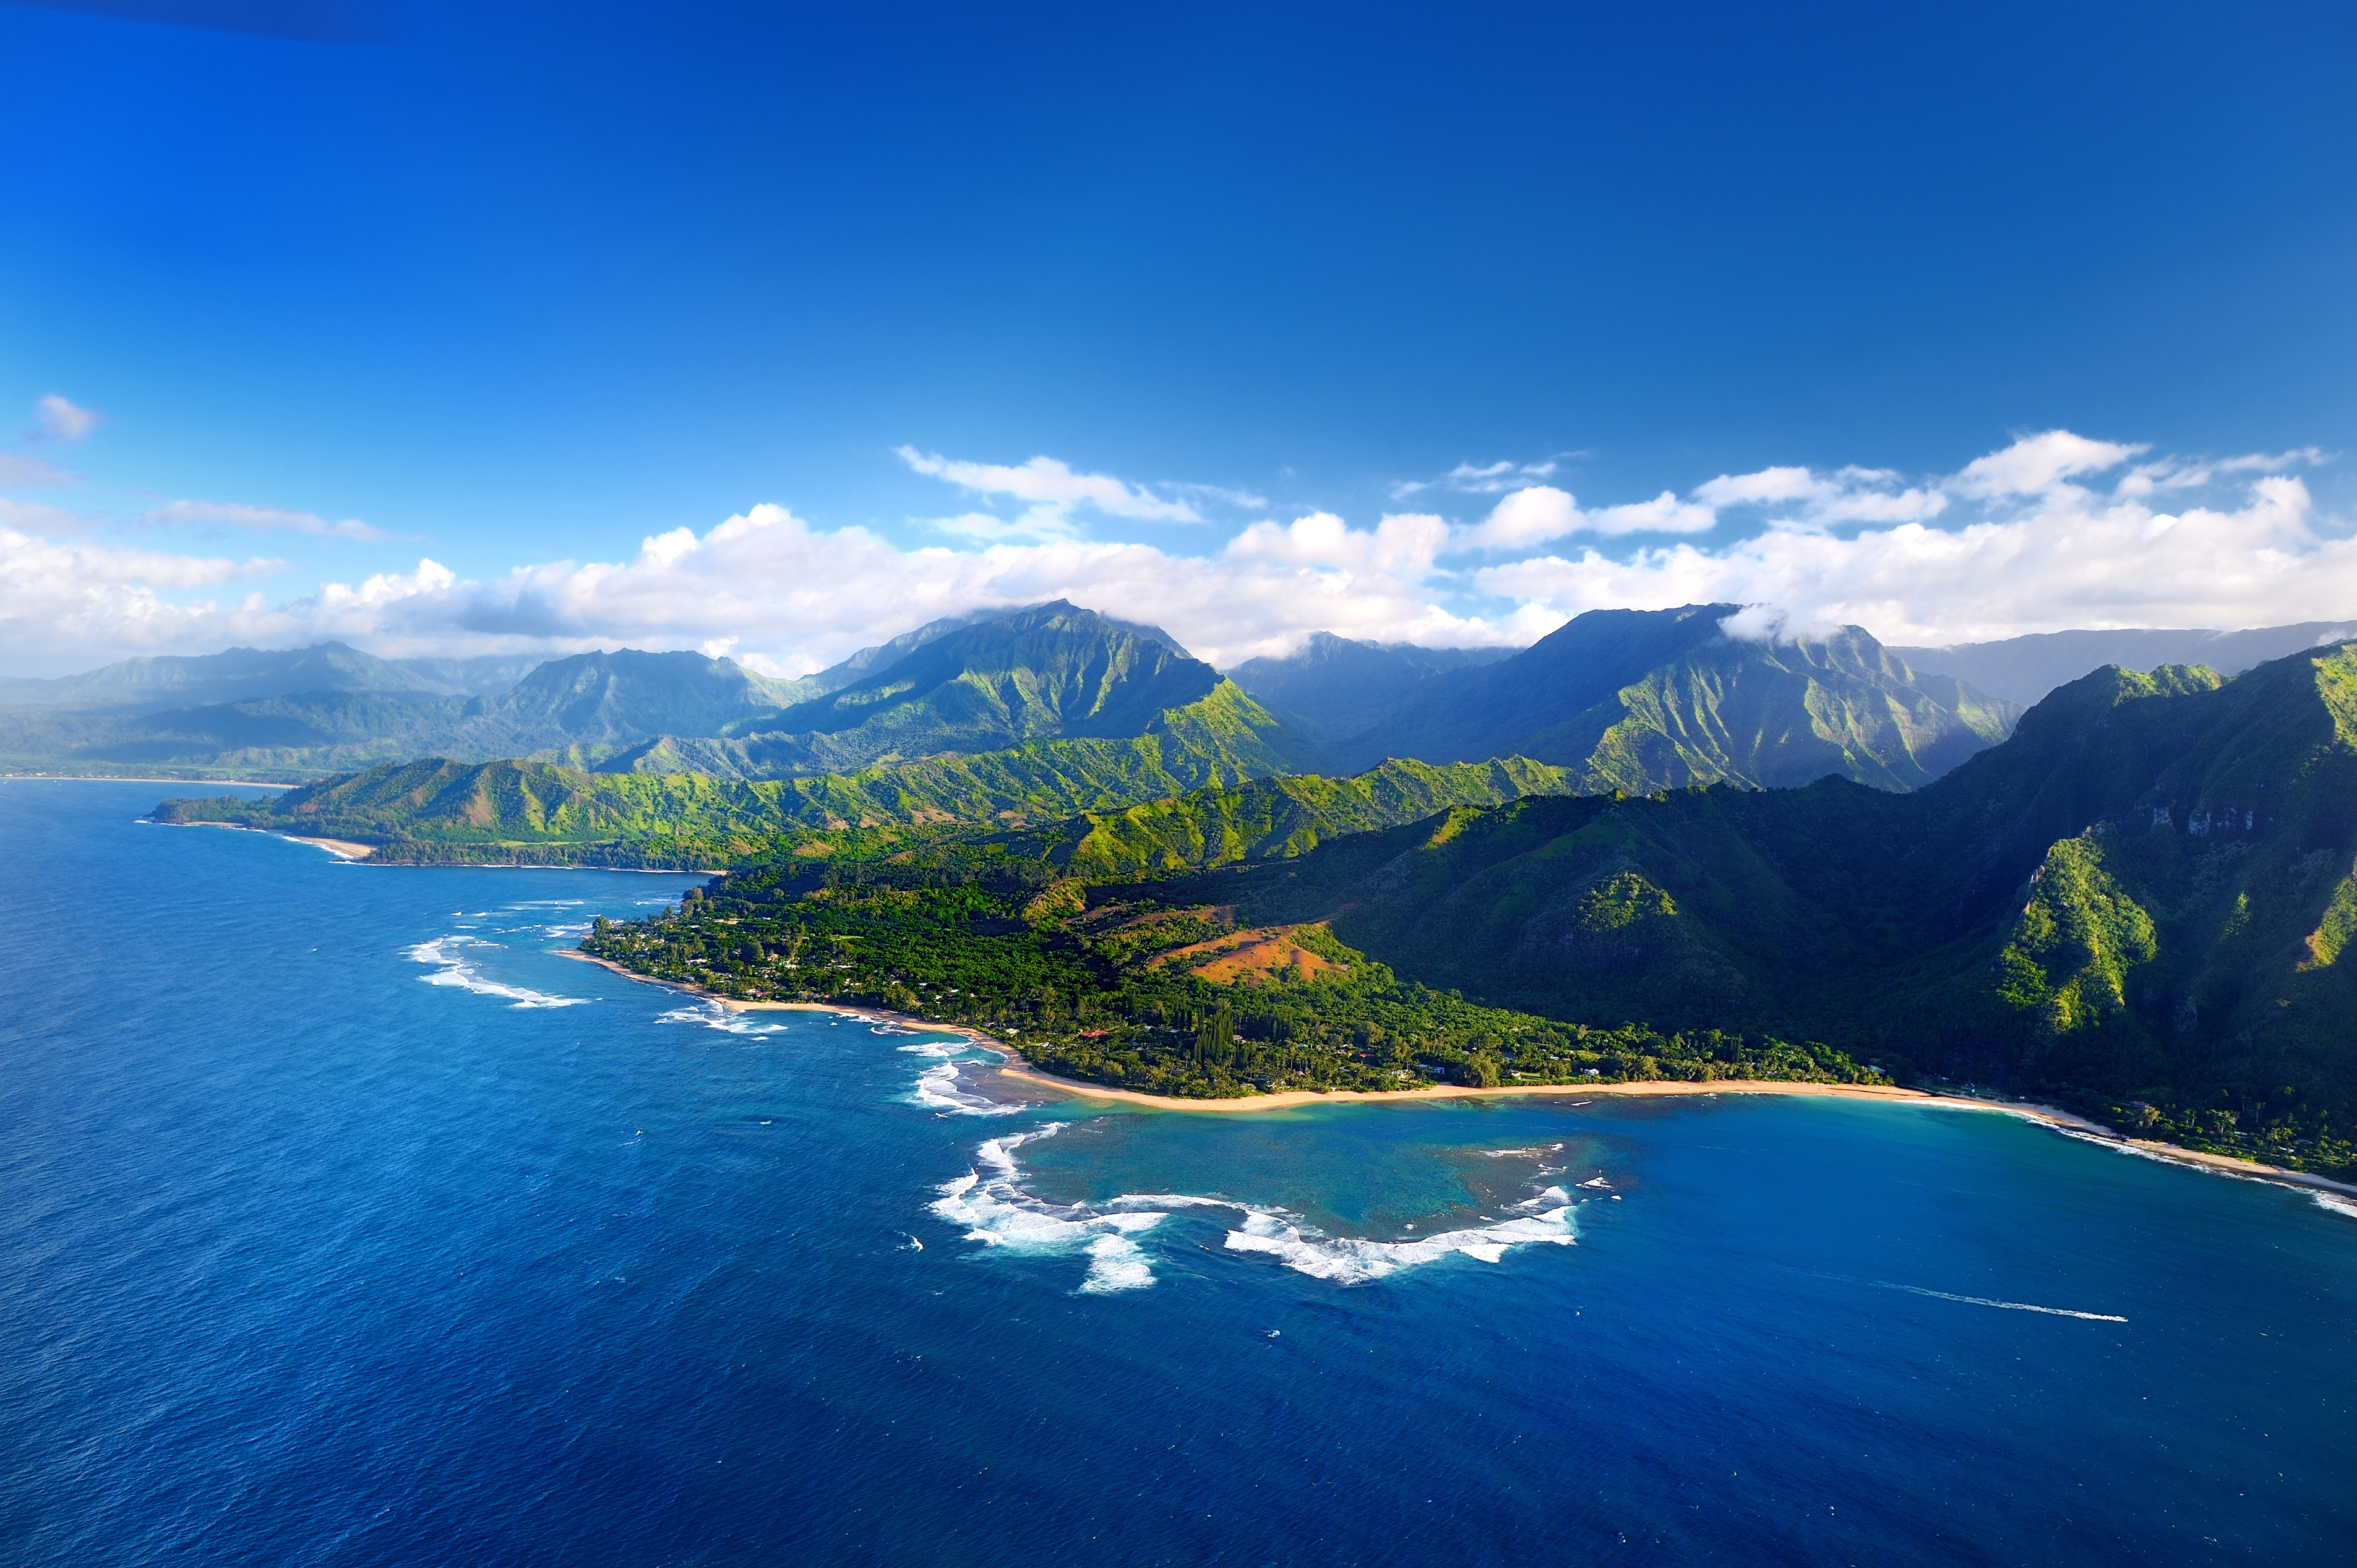 The stunning Na Pali coastline was made famous by Jurassic Park